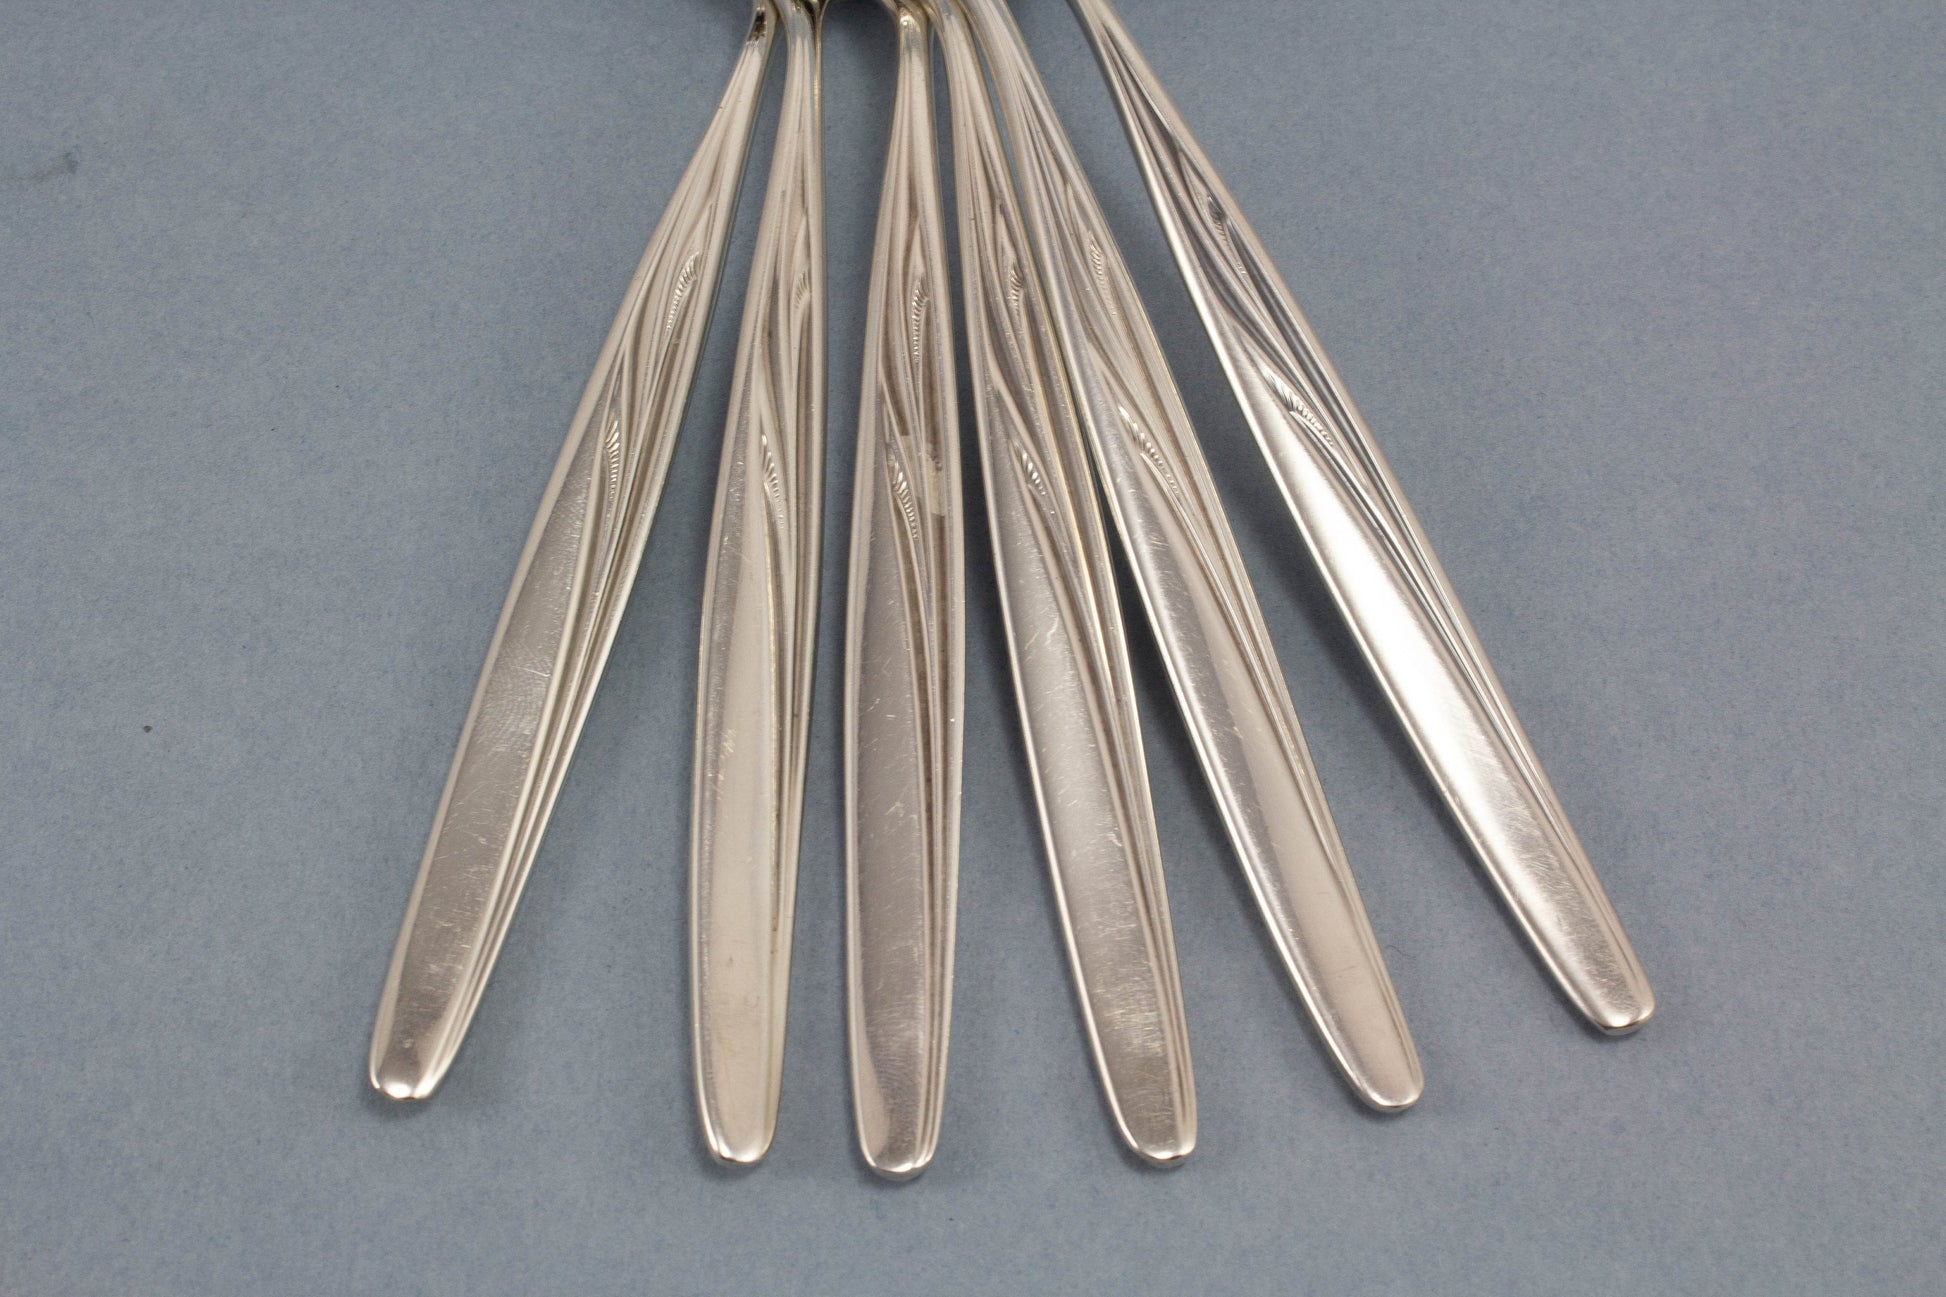 8 silver plated cup spoon, soup spoon, WMF Heidelberg